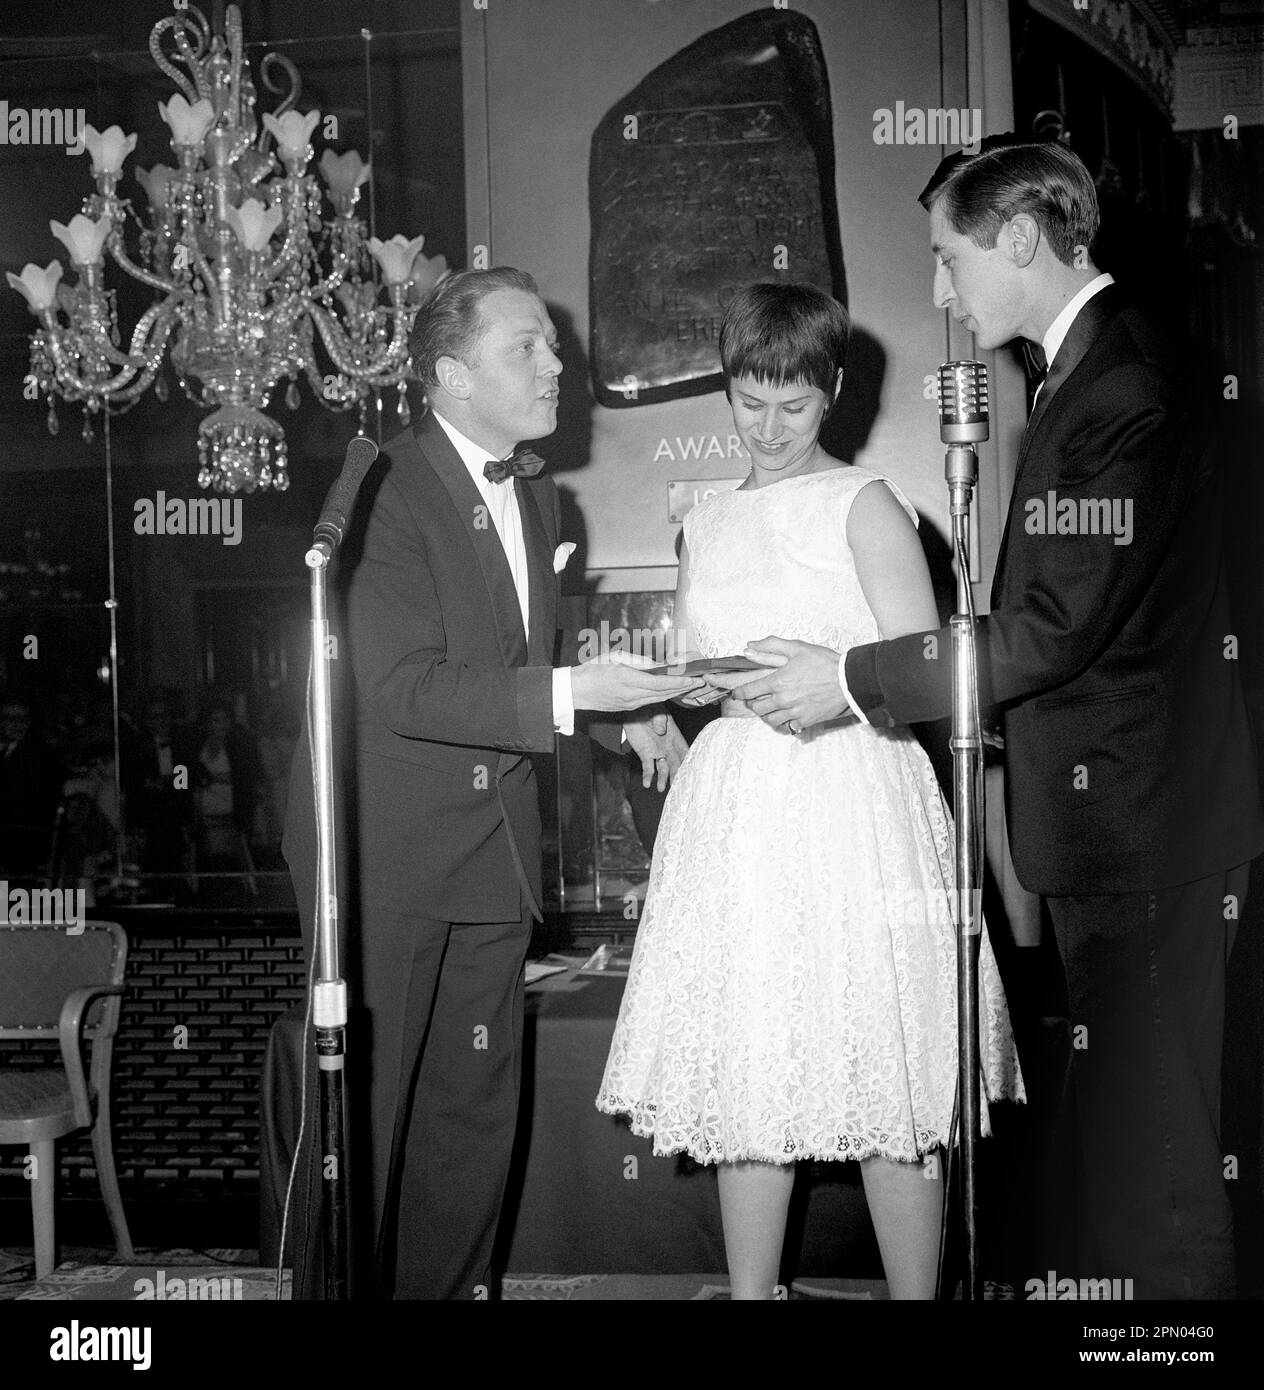 File photo dated 26/04/62 of the award for the Best British Dramatic Screenplay in 1961, given to Shelagh Delaney and Tony Richardson for the film 'A Taste of Honey', being accepted on their behalf by Rita Tushingham and Murray Melvin from Richard Attenborough (left) at the first annual awards dinner of the Television and Screen Writers' Guild at the Dorchester Hotel. London. Torchwood actor Murray Melvin's death on Friday was announced by a friend, who said the actor had 'never fully recovered' from a fall in December, before he died aged 90 . Issue date: Saturday April 15, 2023. Stock Photo